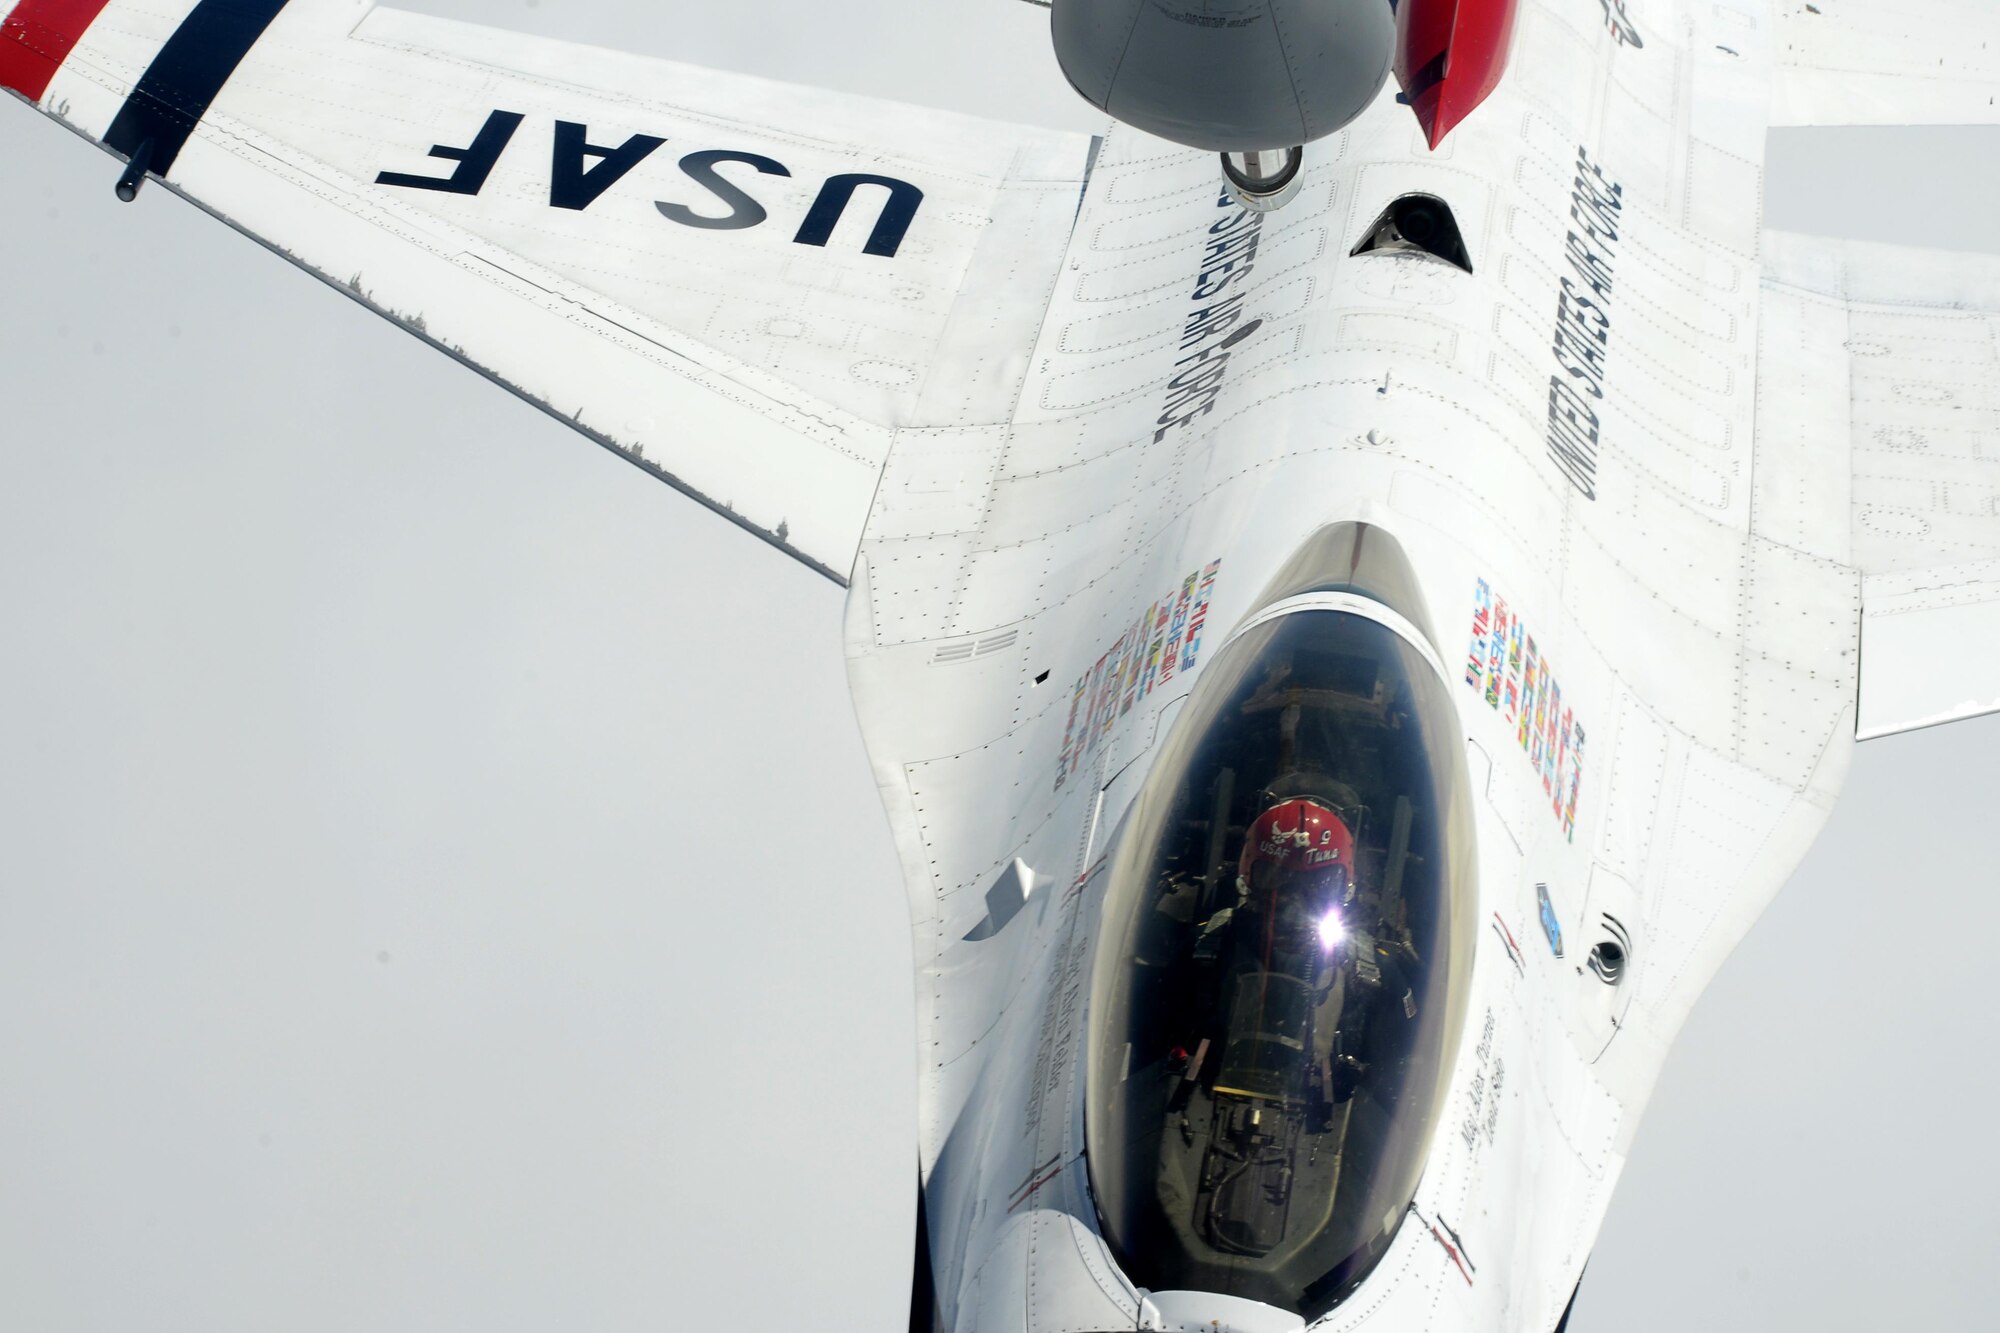 A U.S. Air Force Thunderbird pilot maneuvers towards the boom of a KC-135 Stratotanker, assigned to the 351st Air Refueling Squadron, July 10, 2017, during a refueling mission over the United Kingdom. The Thunderbirds are in the European theater for Bastille Day and the 2017 Royal International Air Tattoo airshow. (U.S. Air Force photo by Senior Airman Justine Rho)